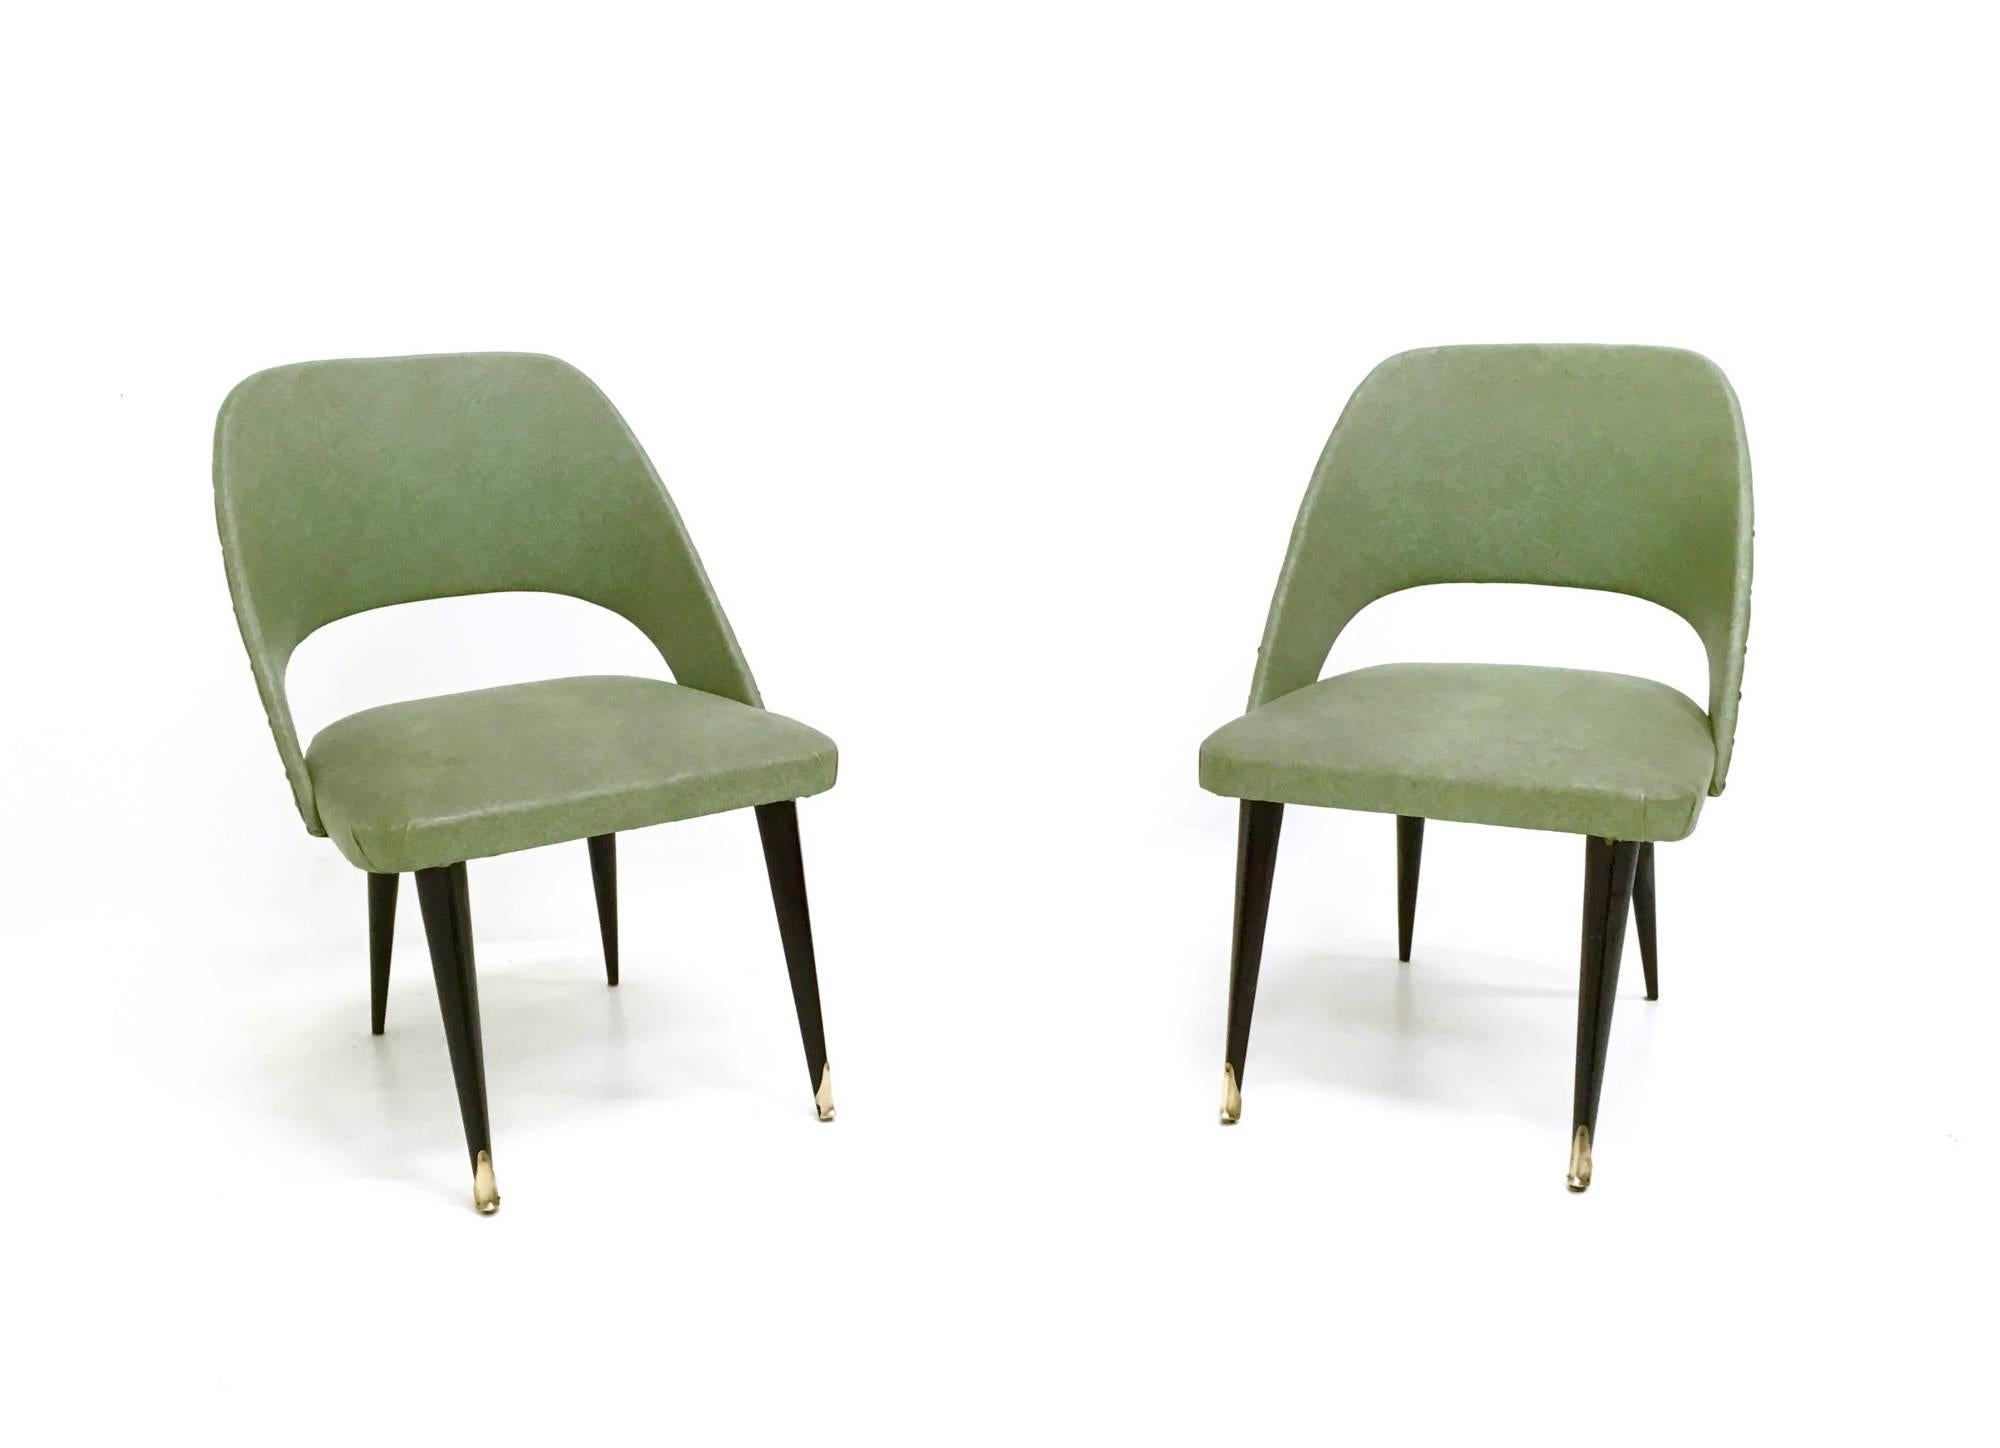 They feature a wooden structure upholstered in vintage skai and ebonized wood legs with brass feet caps. 
In good original condition.